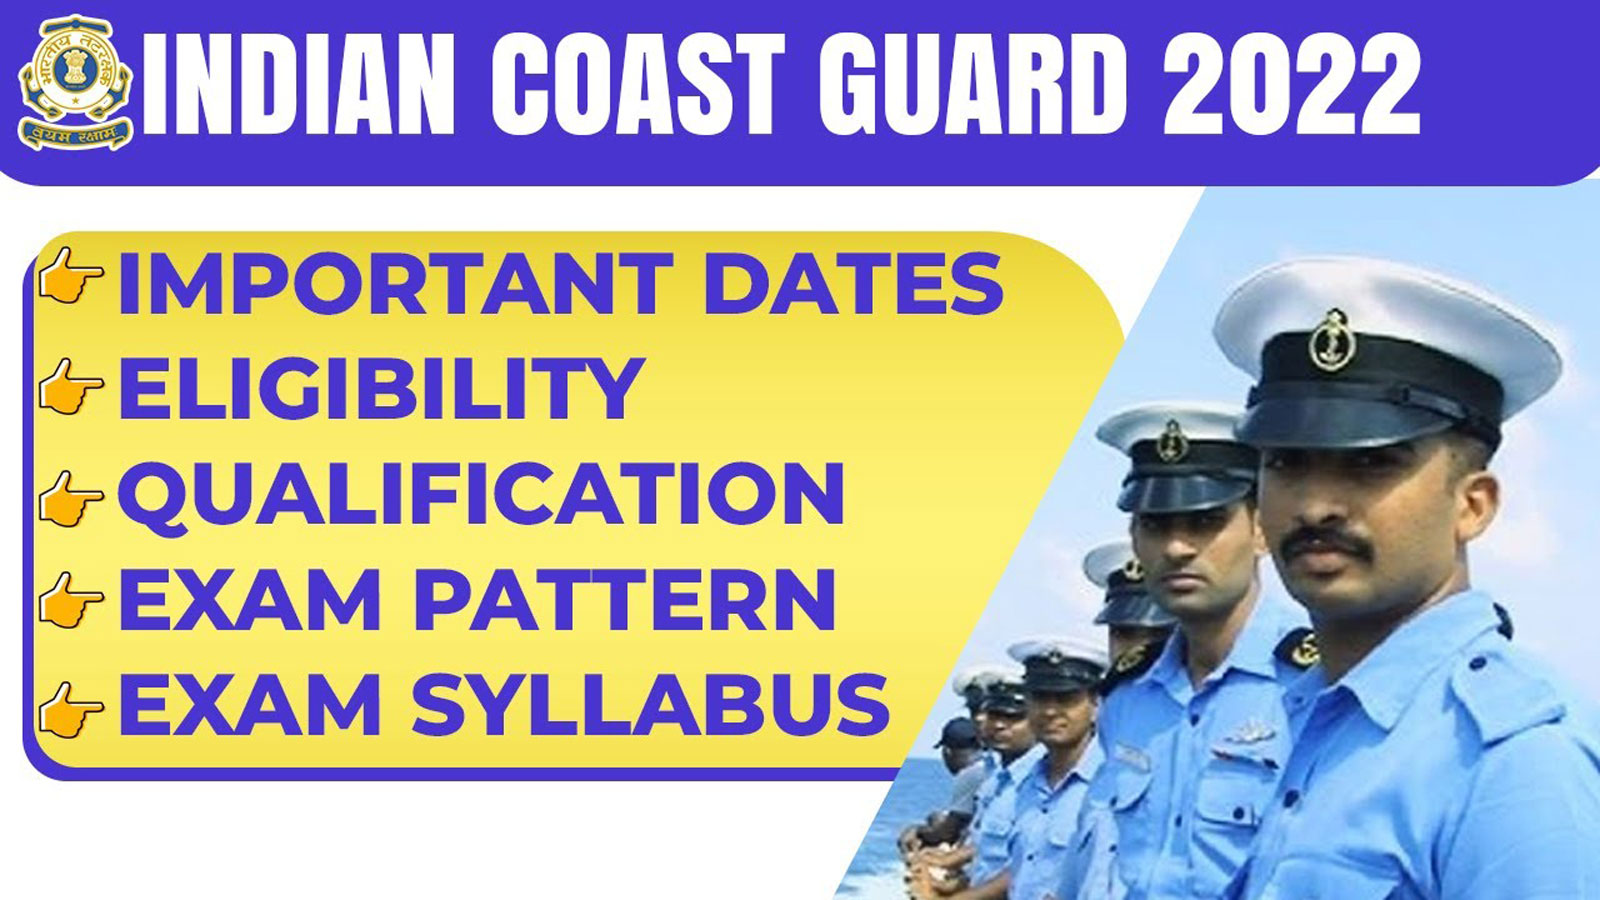 Indian Coast Guard Recruitment, Check Posts and Eligibility